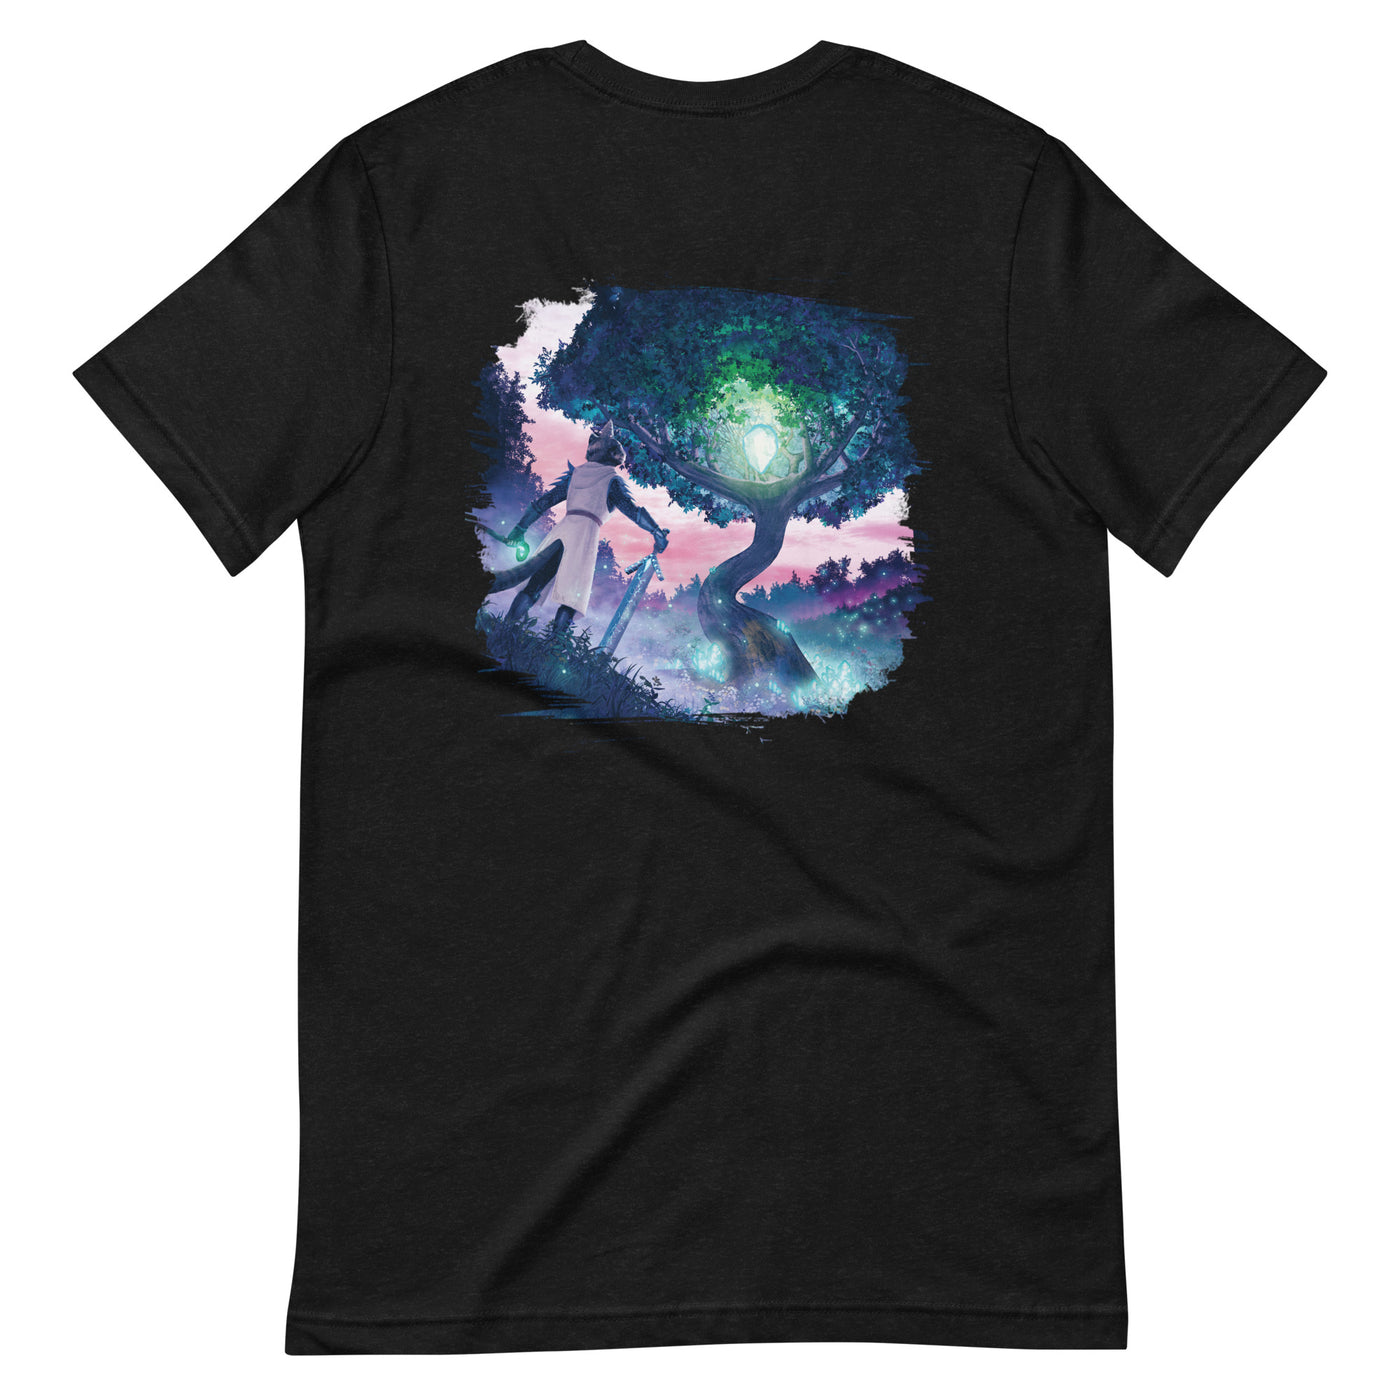 back view of black heather short-sleeve t-shirt featuring a kristala game promotional illustration with a warrior cat in armor holding weapons and standing in front of a magic crystal tree white background